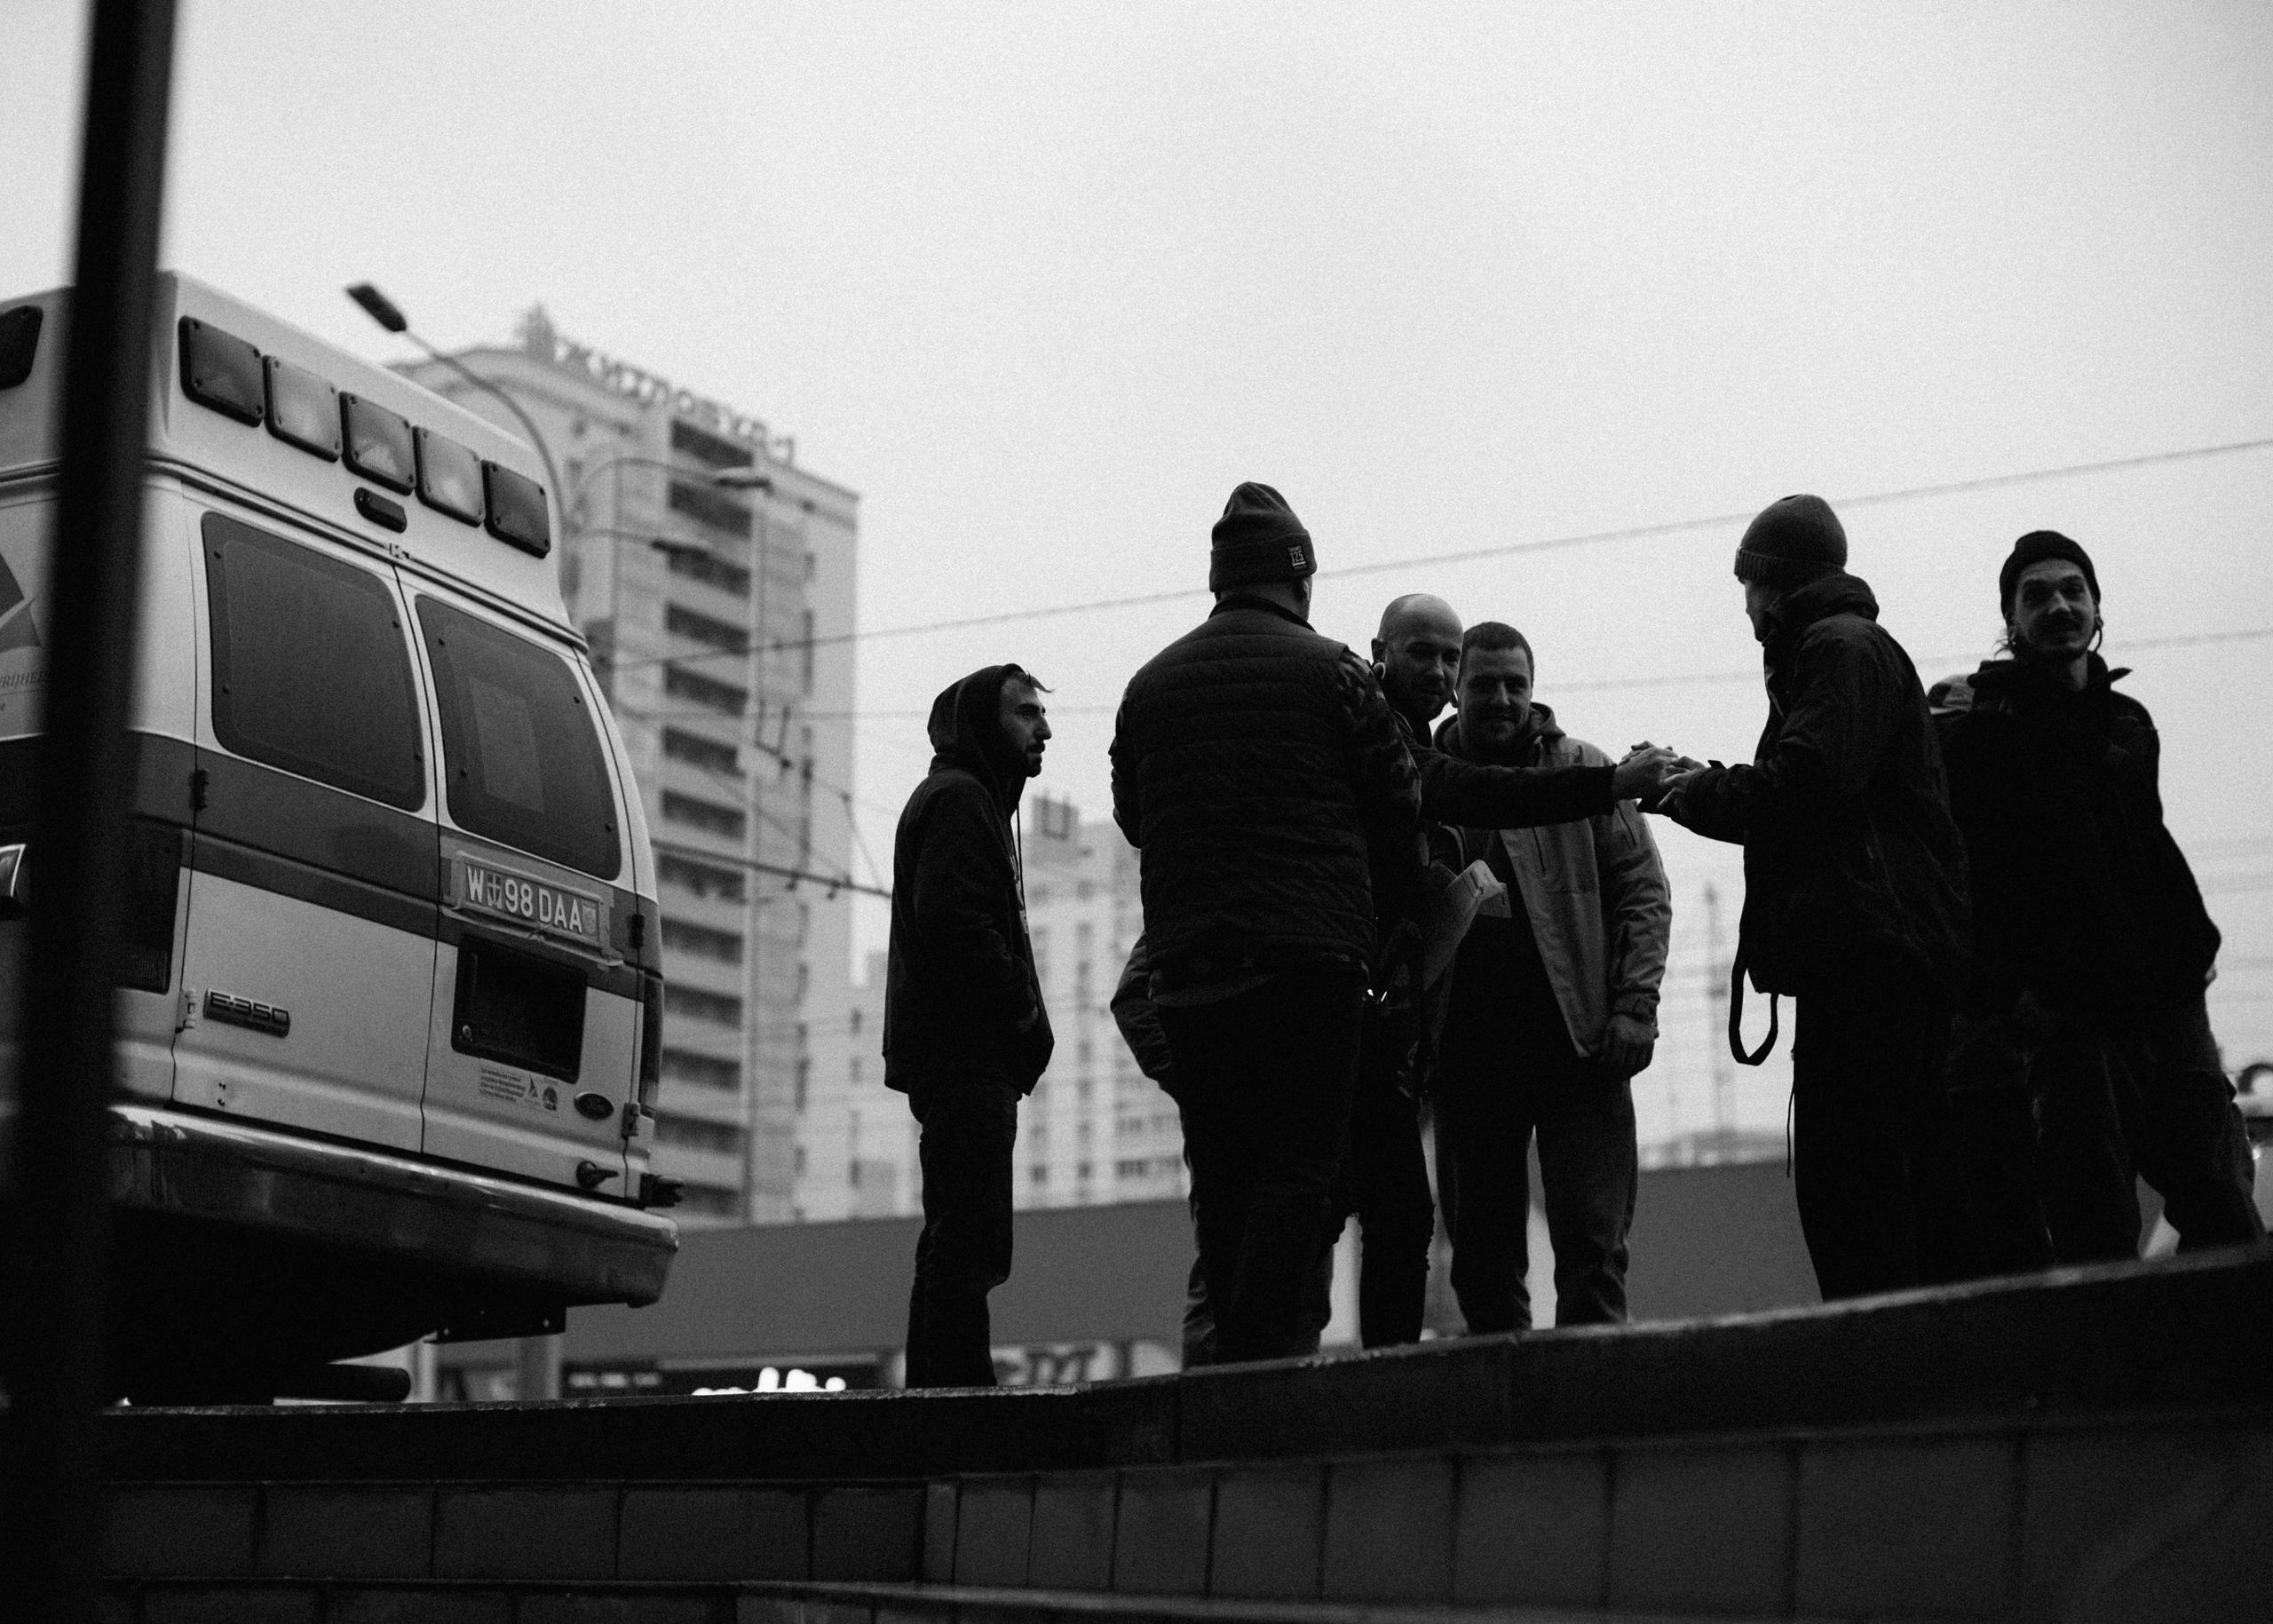 Black and white silhouettes of volunteer team and ambulance truck in front of buildings in Ukraine